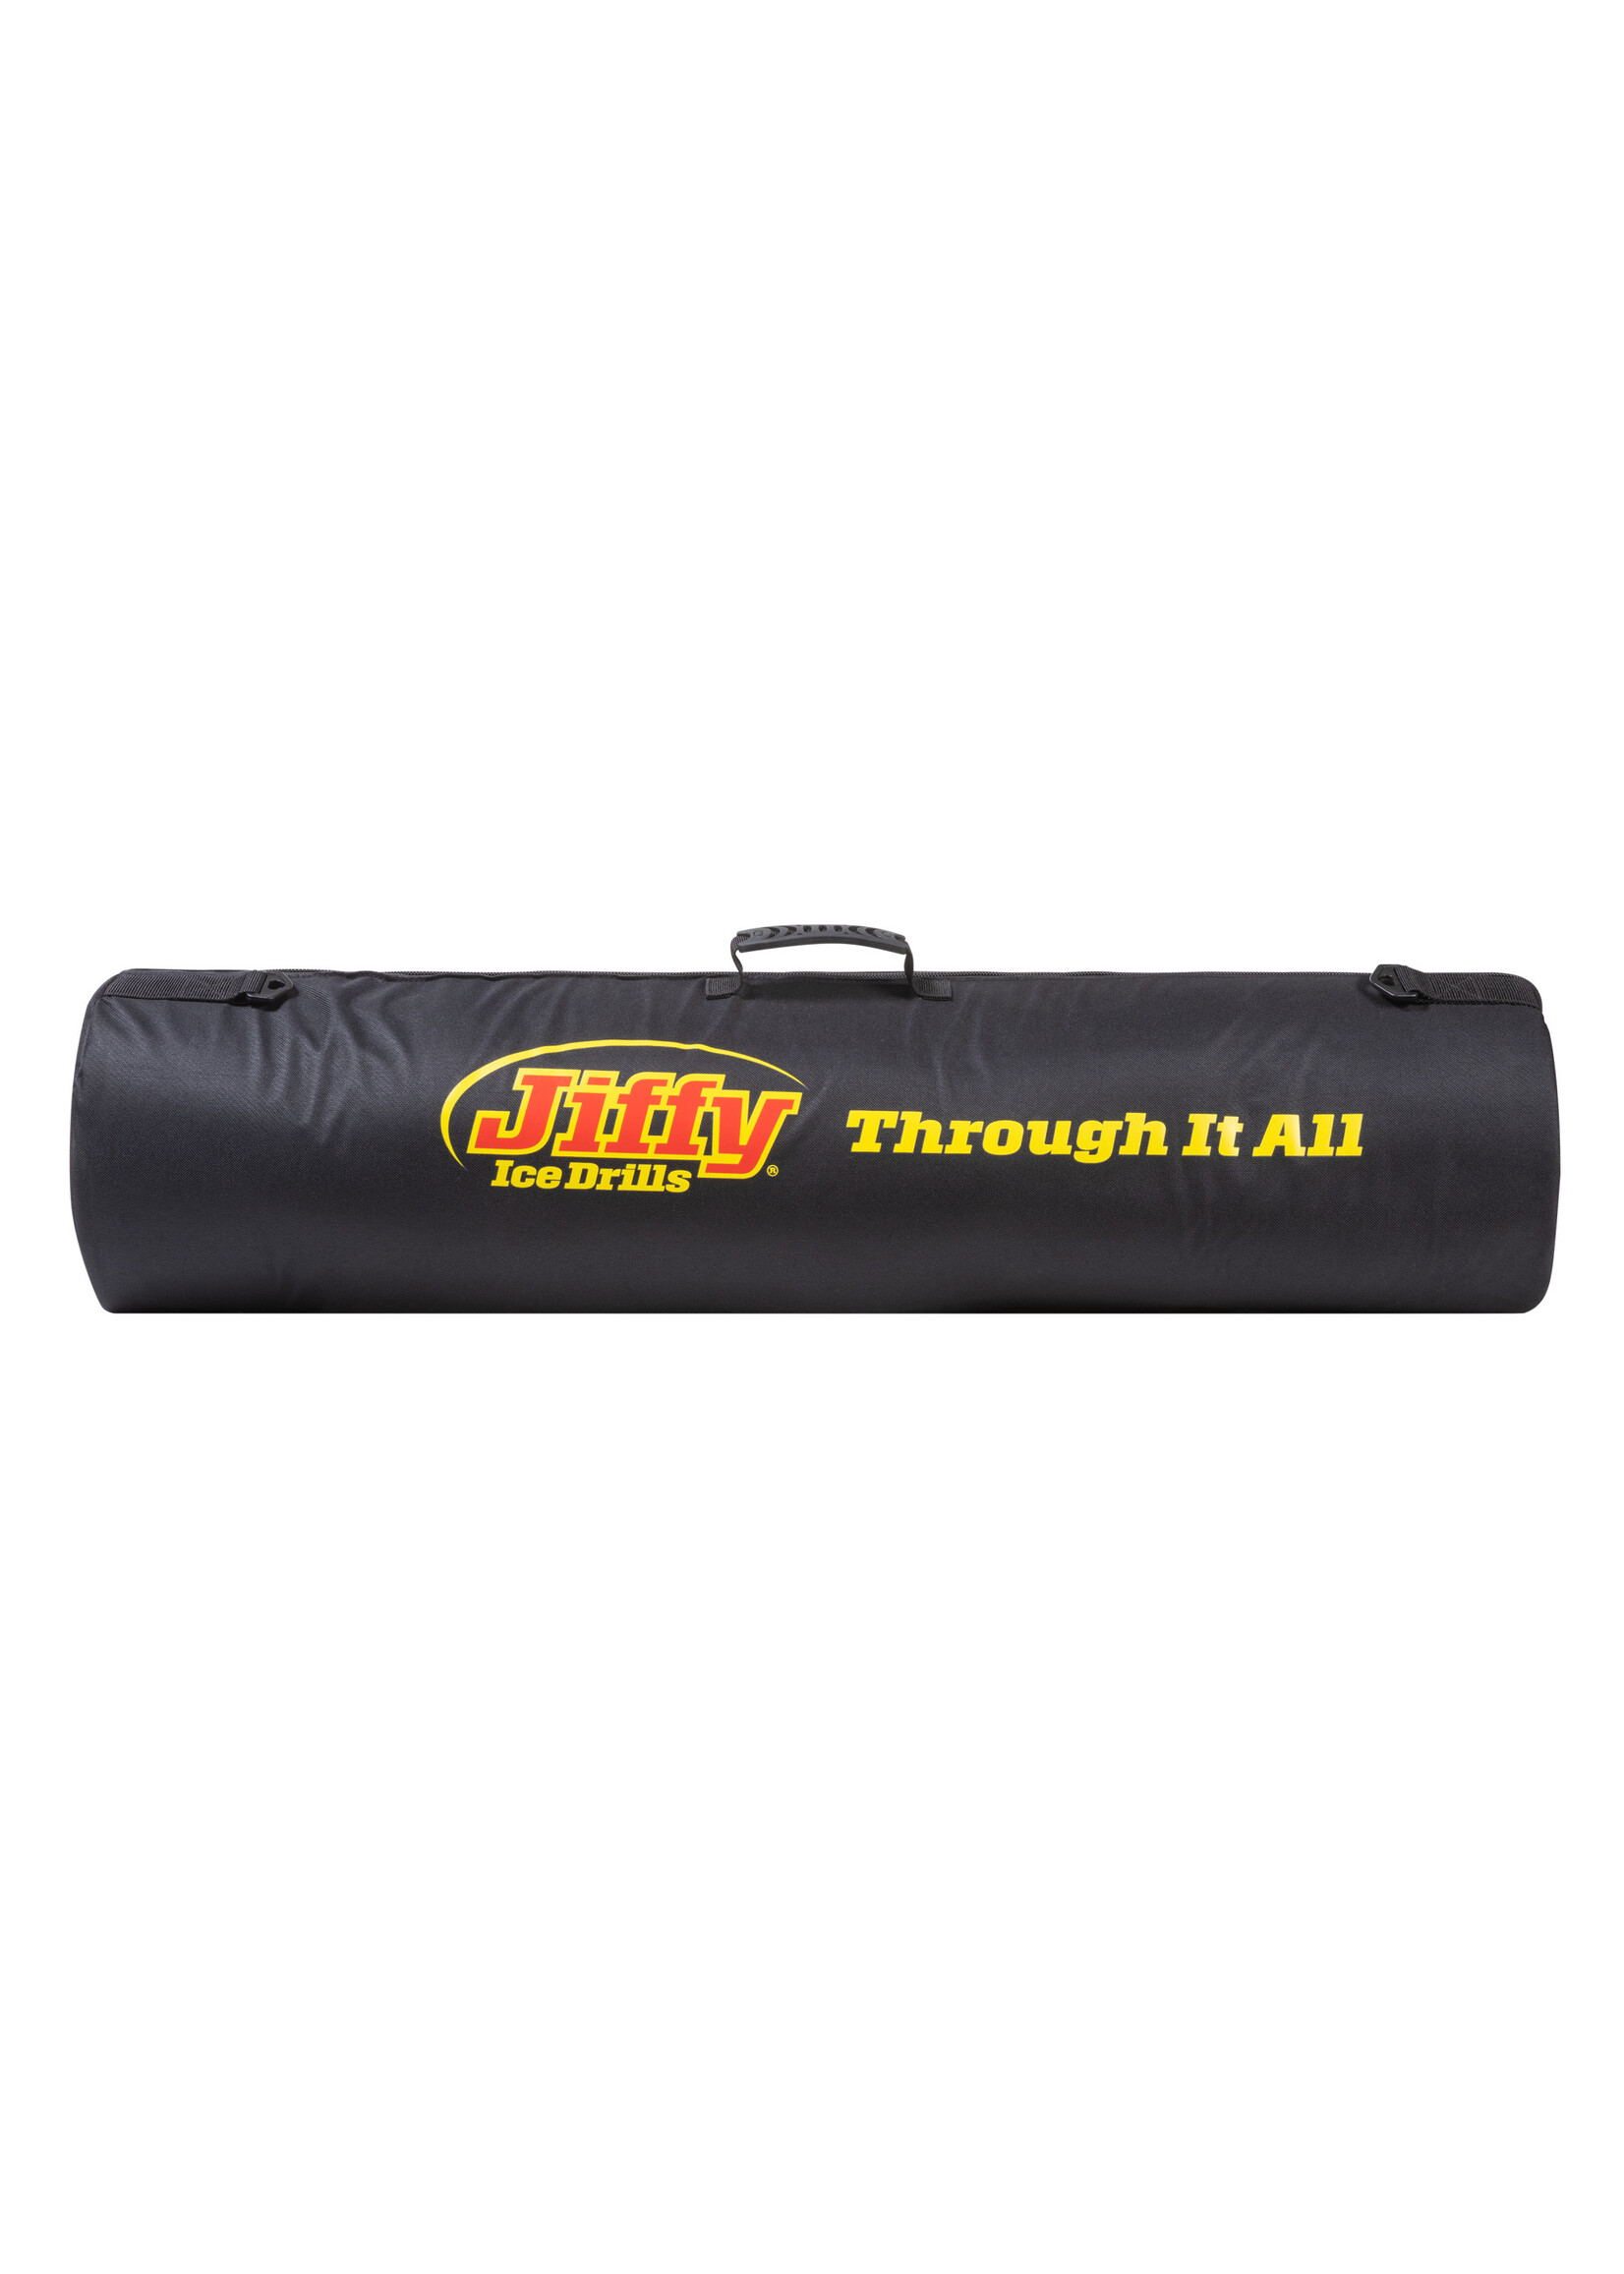 JIffy Jiffy Tough Carry Bag for Drill augers